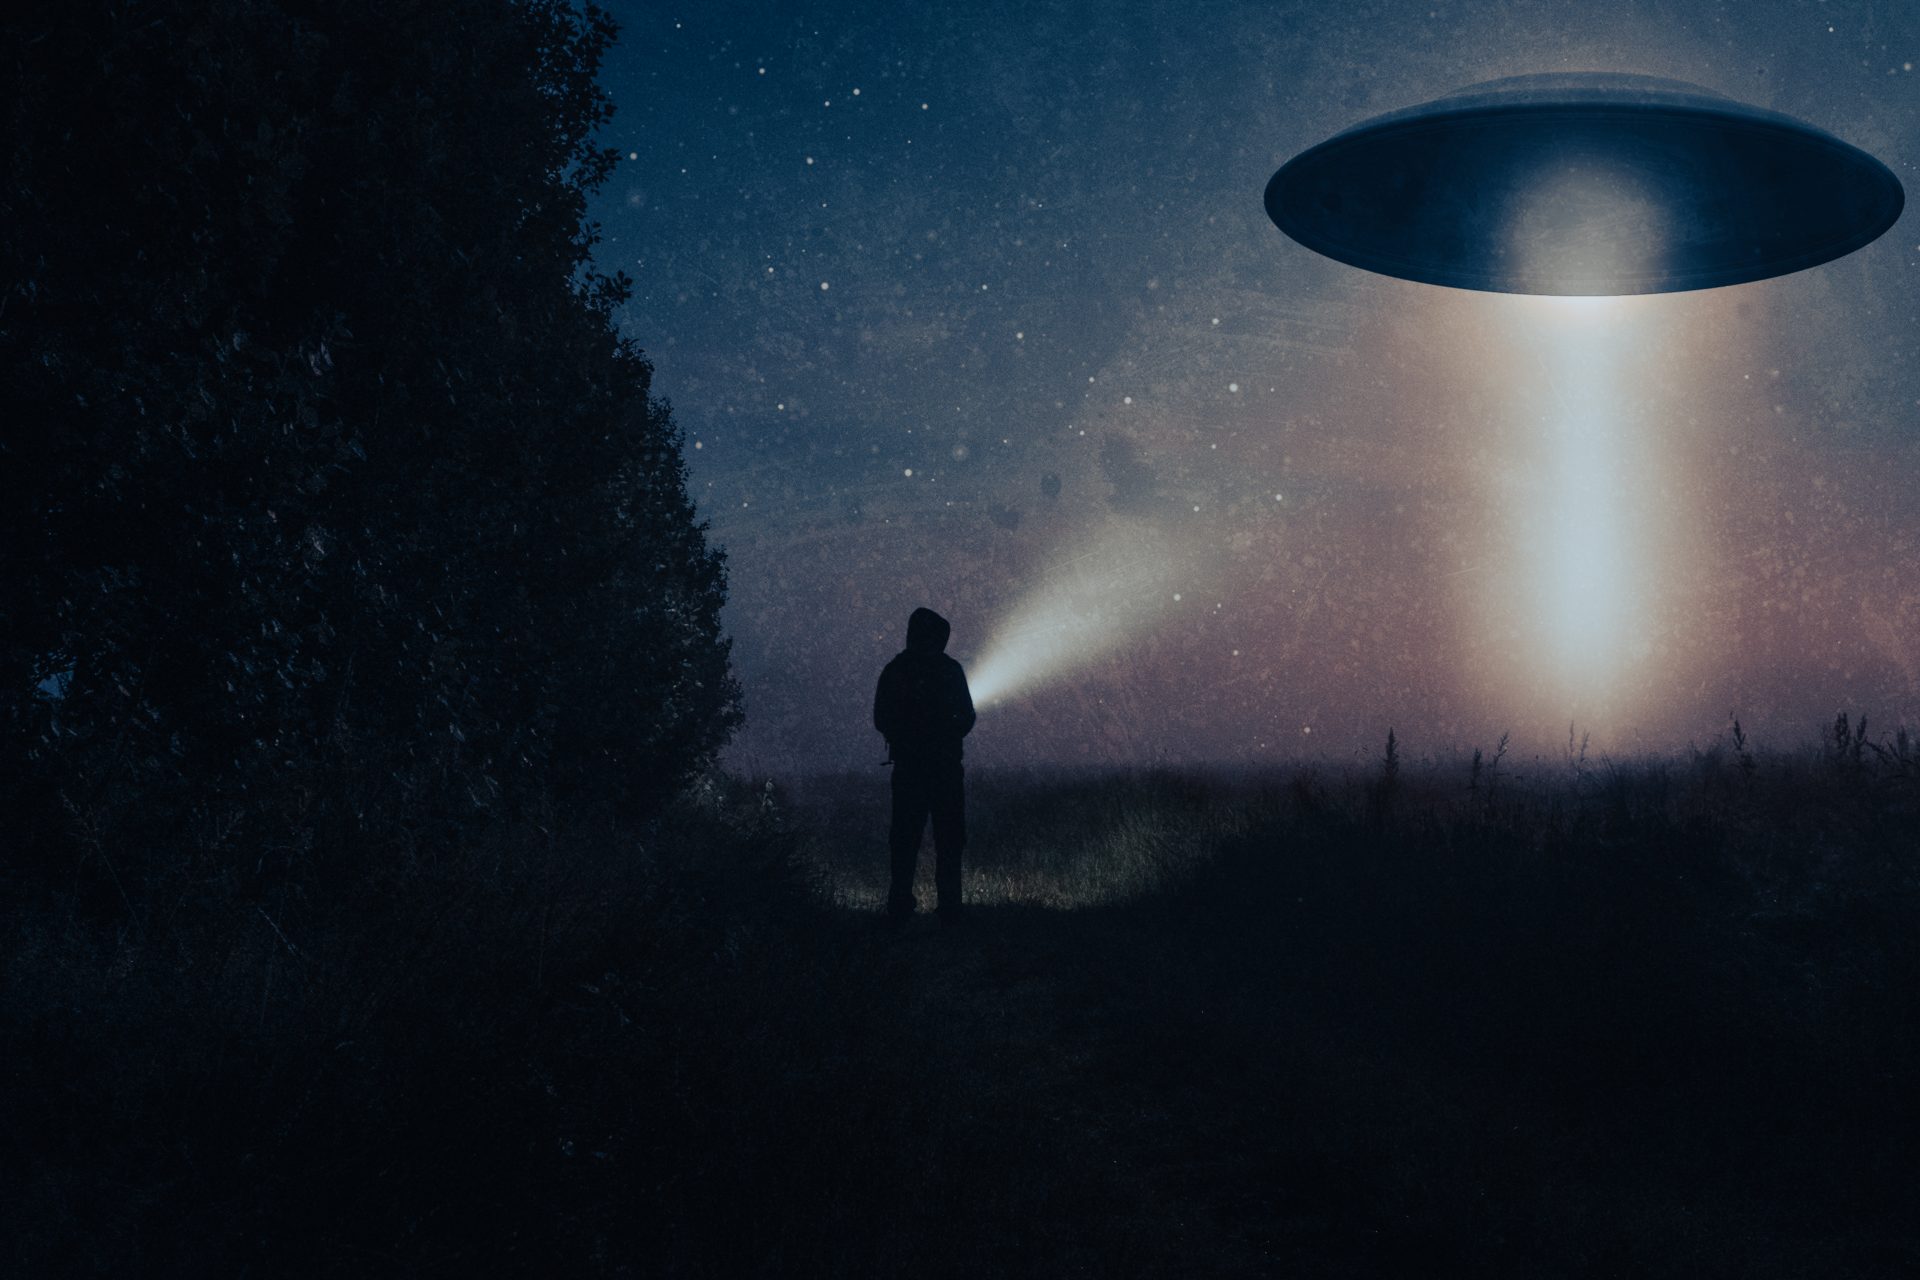 The Fermi Paradox about extraterrestrial life, explained